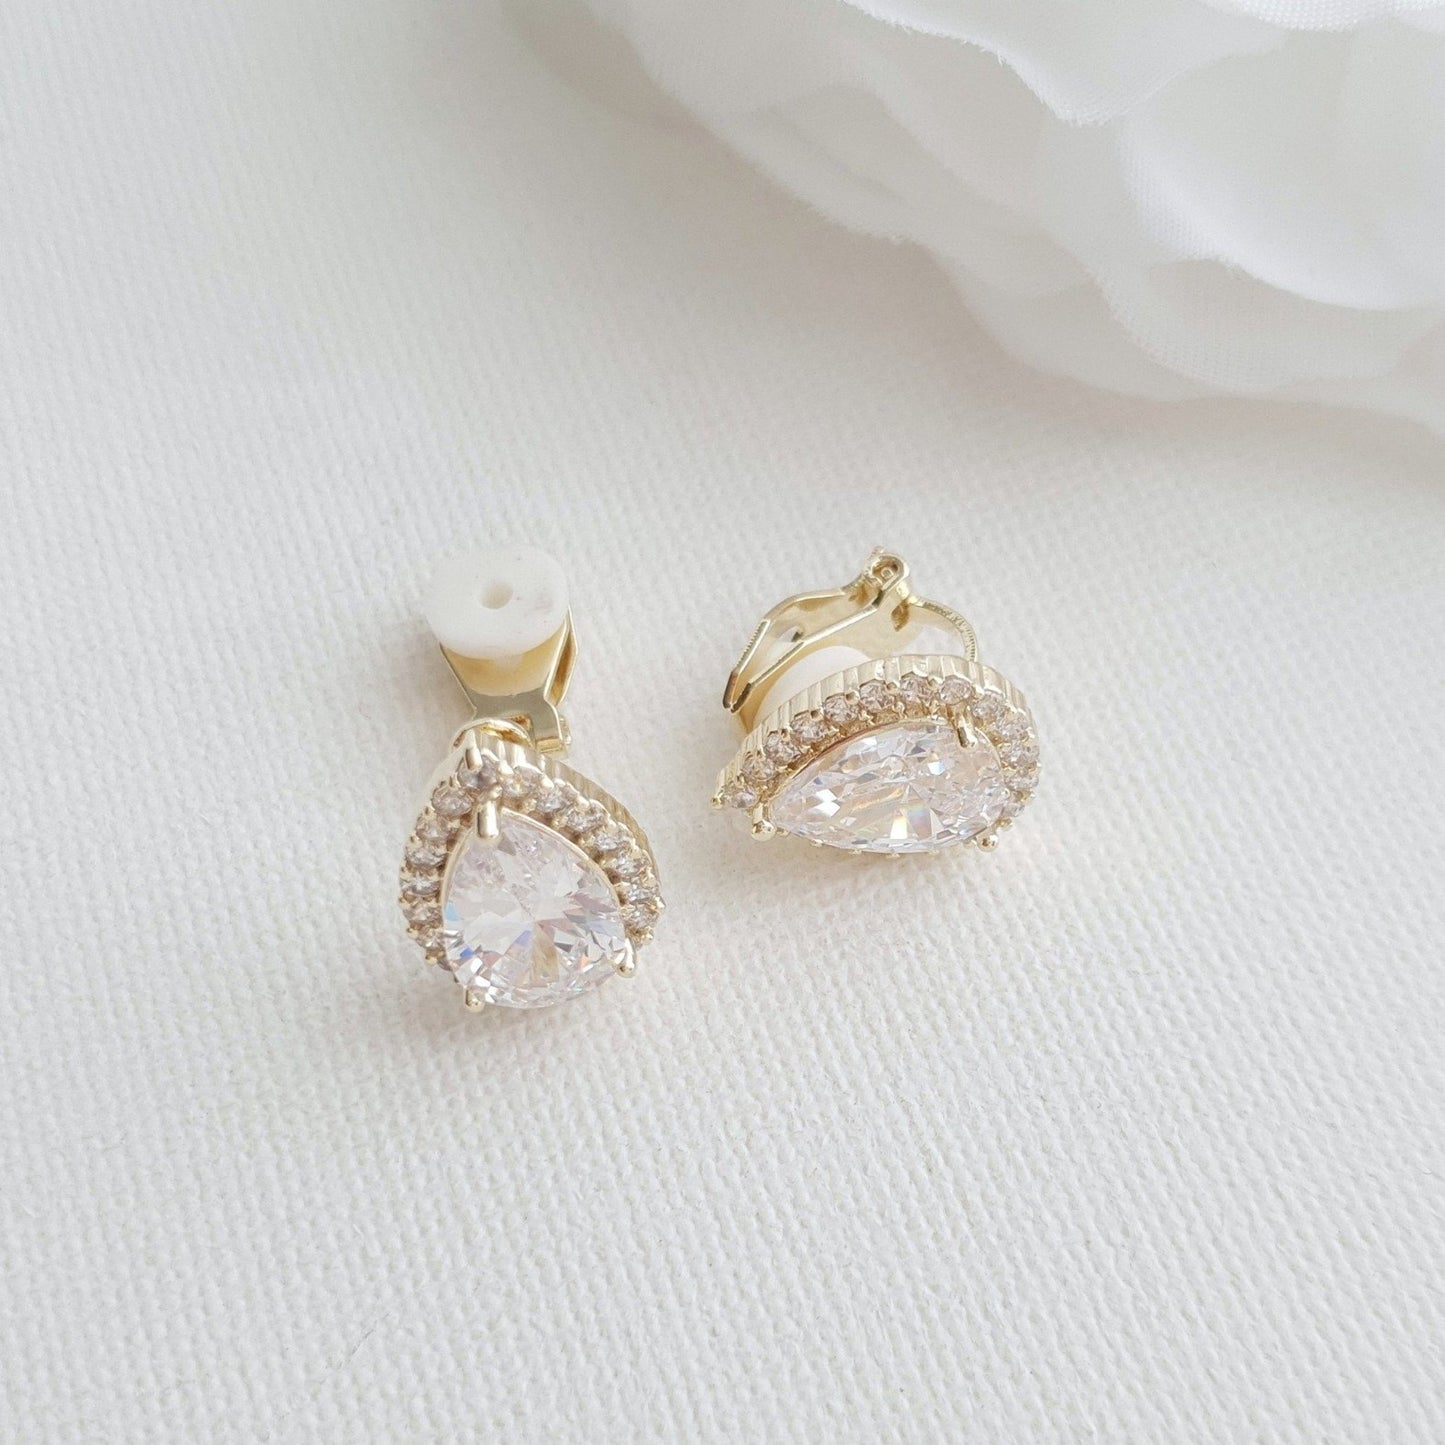 Gold Clip On Earrings in Teardrop CZ for Brides Bridesmaids-Emma - PoetryDesigns